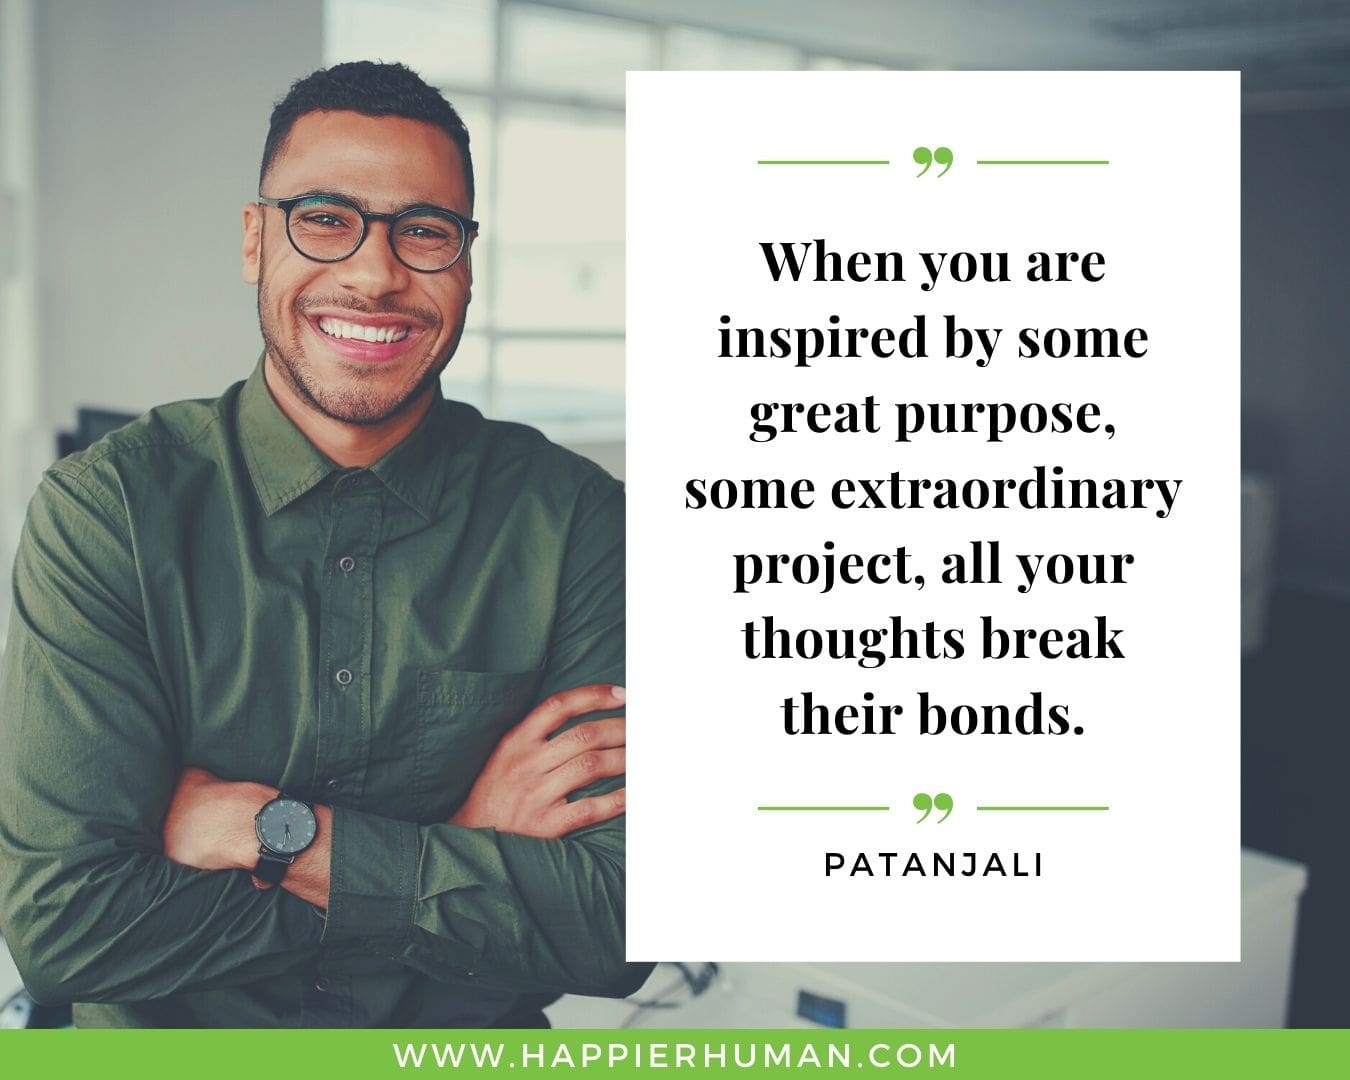 Positive Energy Quotes - “When you are inspired by some great purpose, some extraordinary project, all your thoughts break their bonds.” - Patanjali